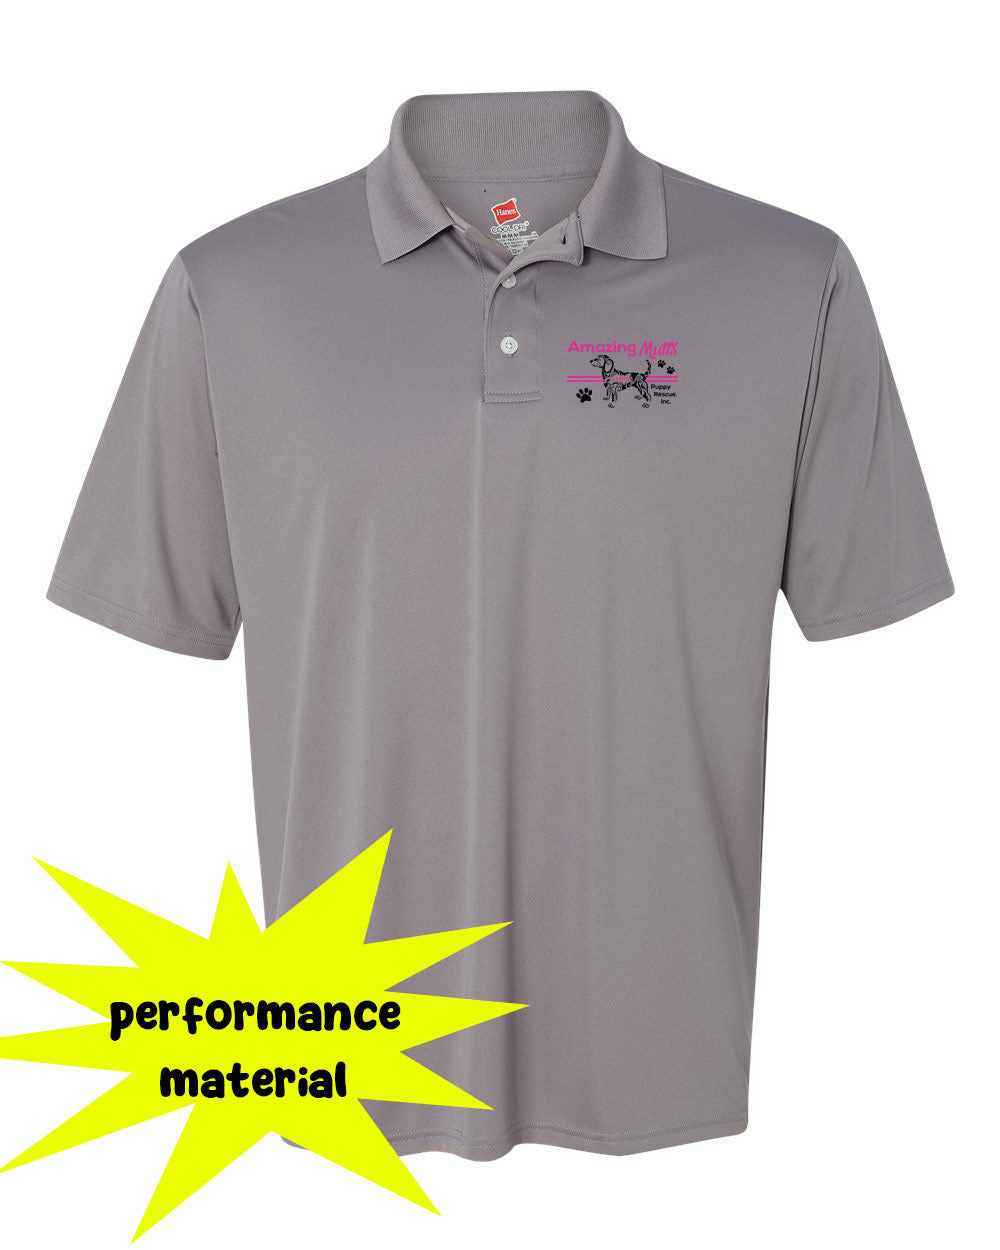 AMPR Performance Material Polo T-Shirt Design 9